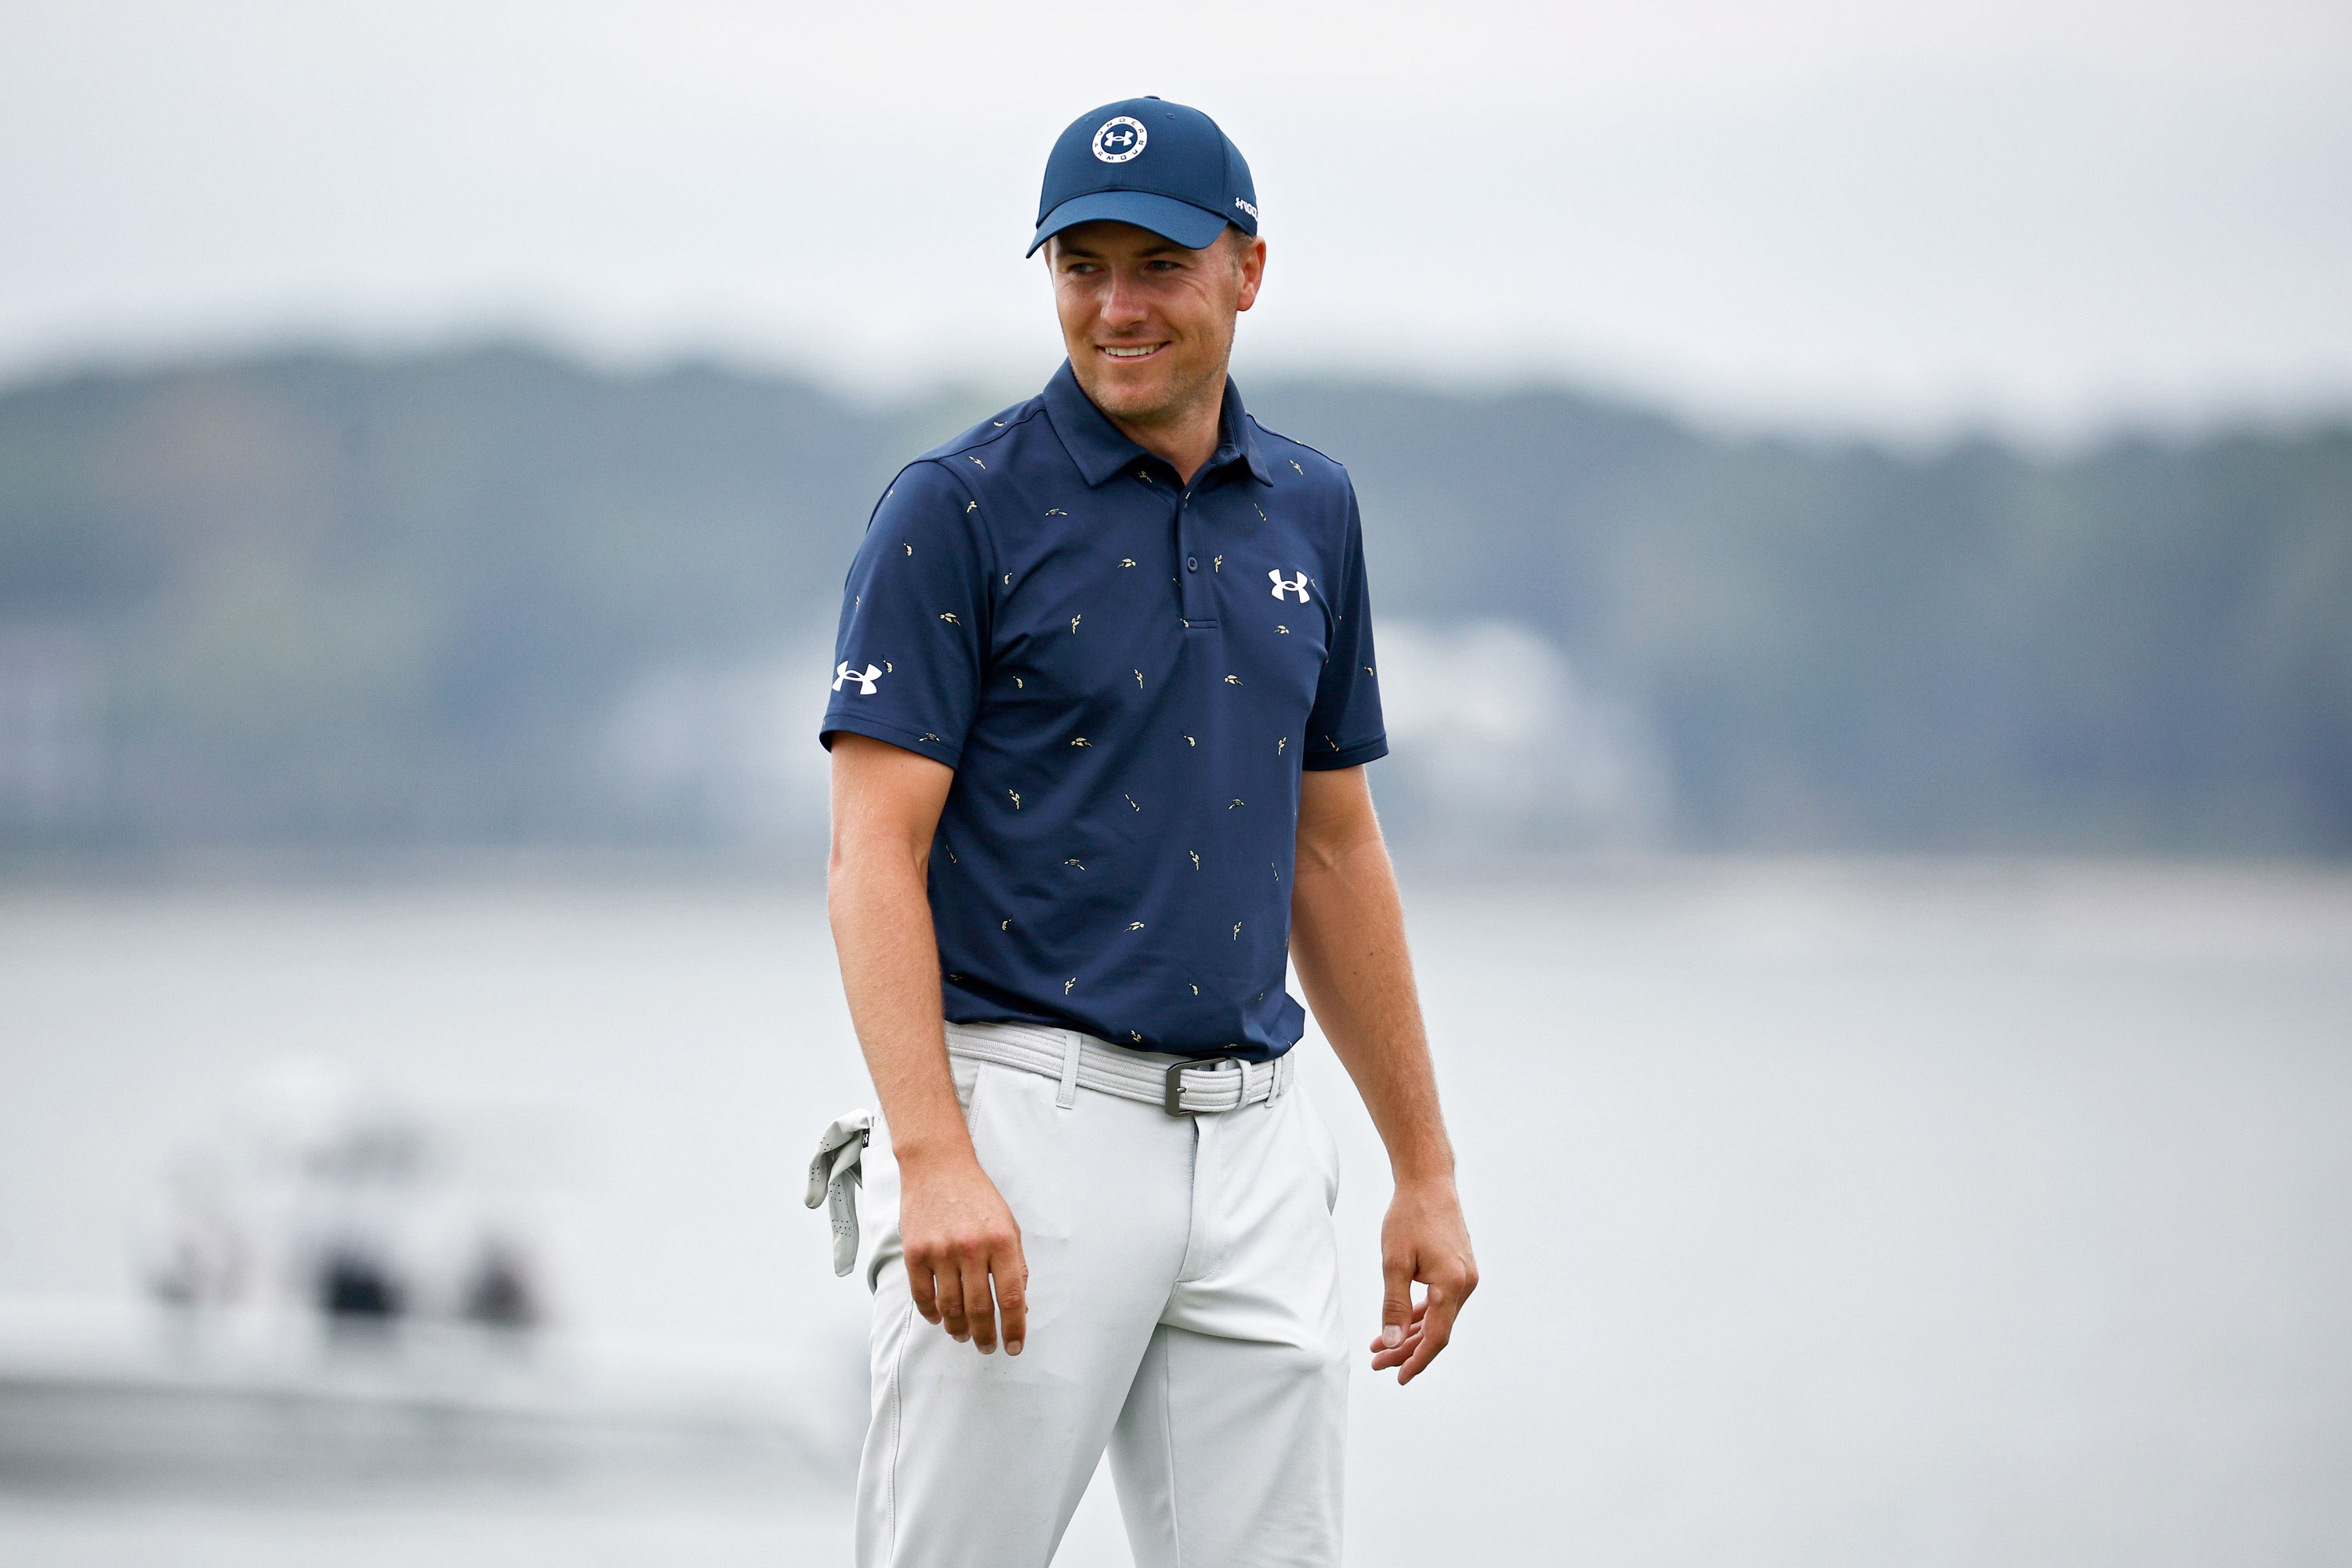 Jordan Spieth is the RBC Heritage champ thanks to his own unique bravado |  Golf News and Tour Information | GolfDigest.com